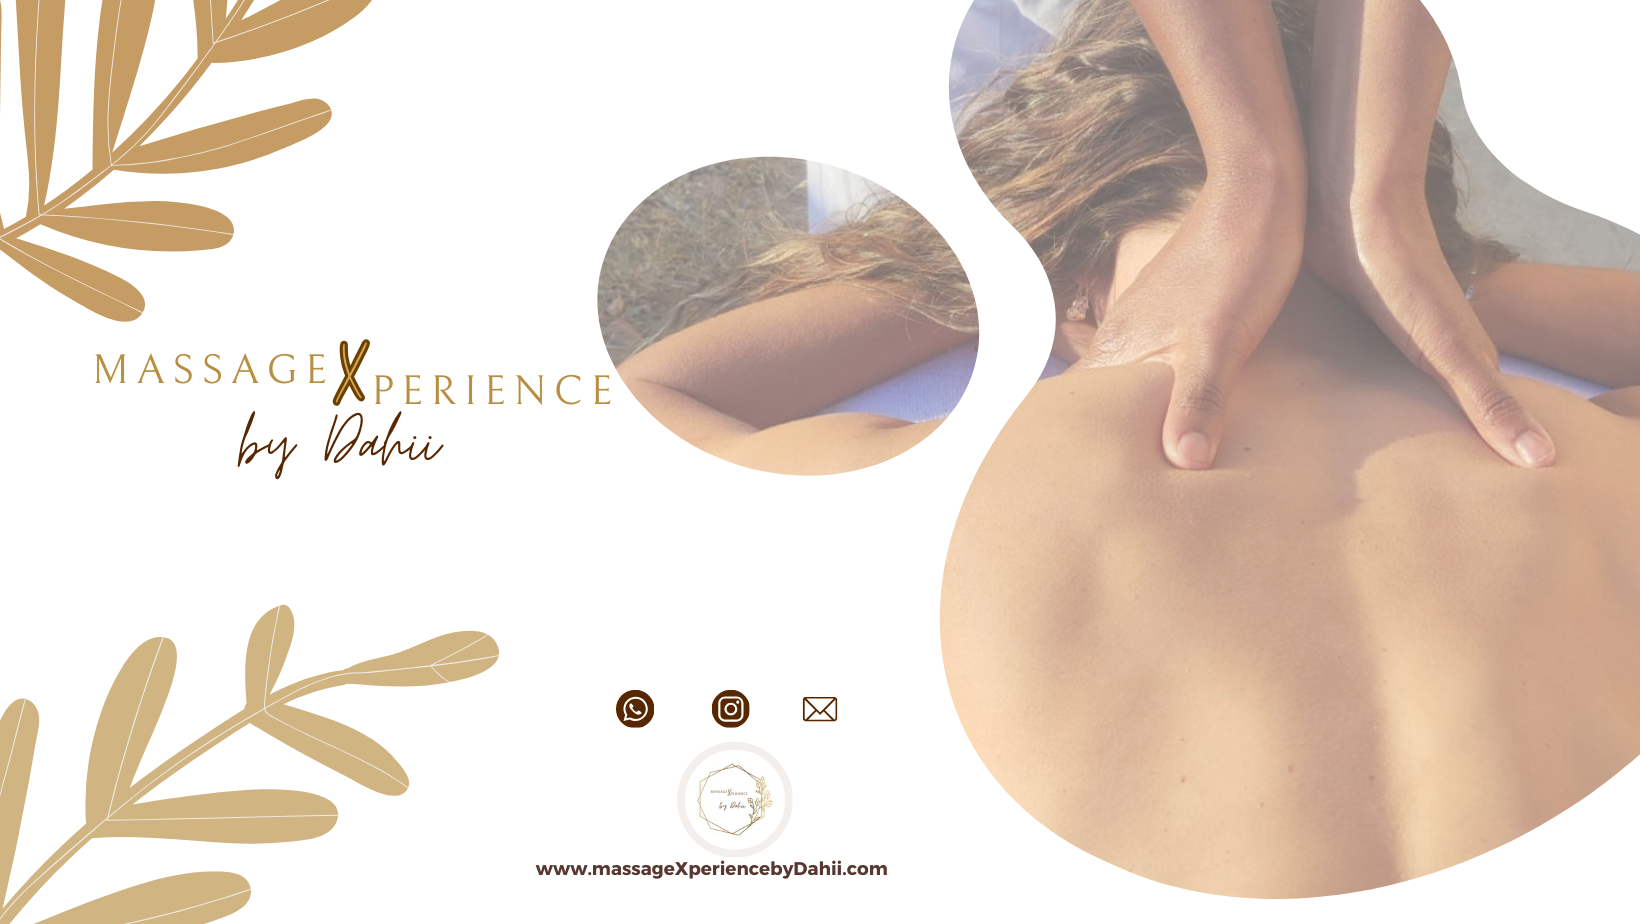 Images MassageXperience by Dahii